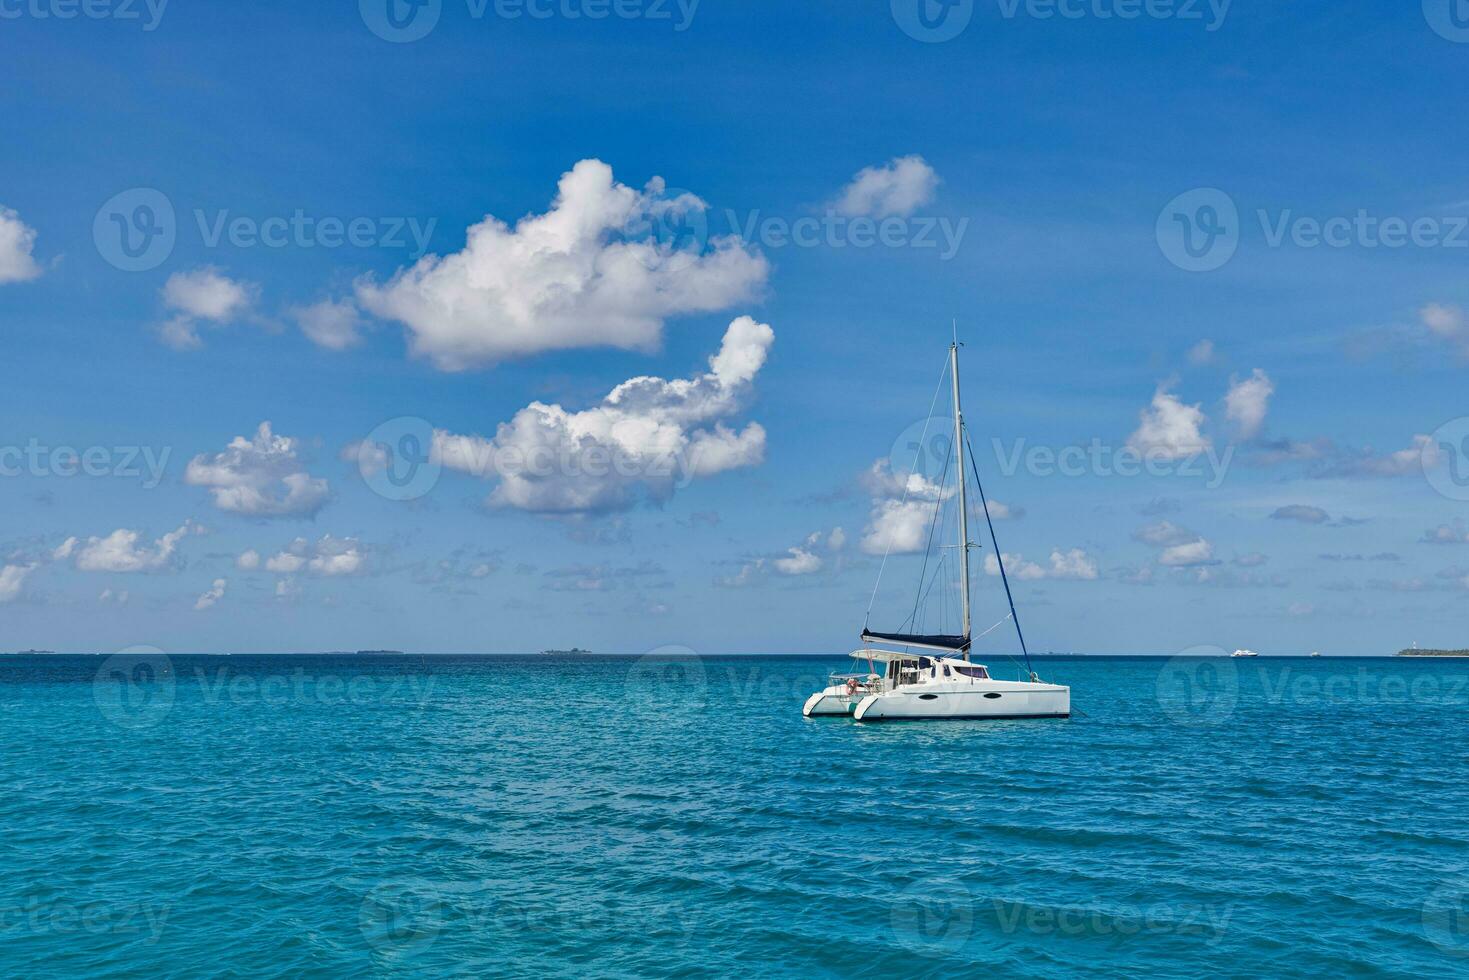 Luxury yacht in open waters with beautiful clouds. Catamaran white sailboat in tropical ocean lagoon, sea horizon under sunny skyline. Idyllic outdoor sport and travel recreation landscape, seascape photo